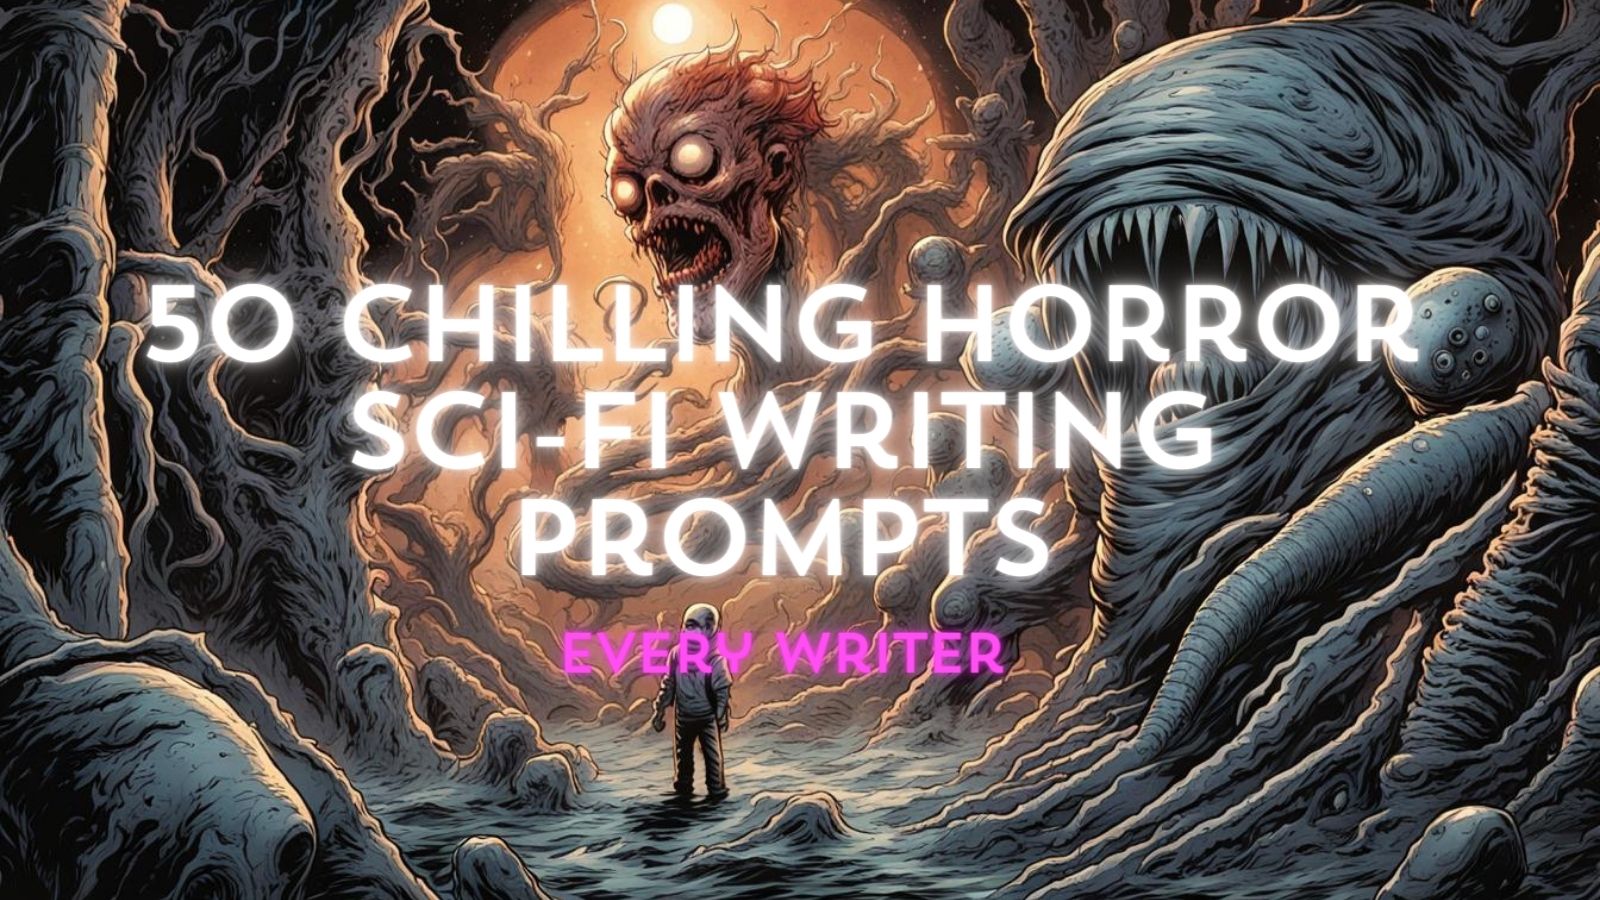 50 Chilling Horror Sci-Fi Writing Prompts